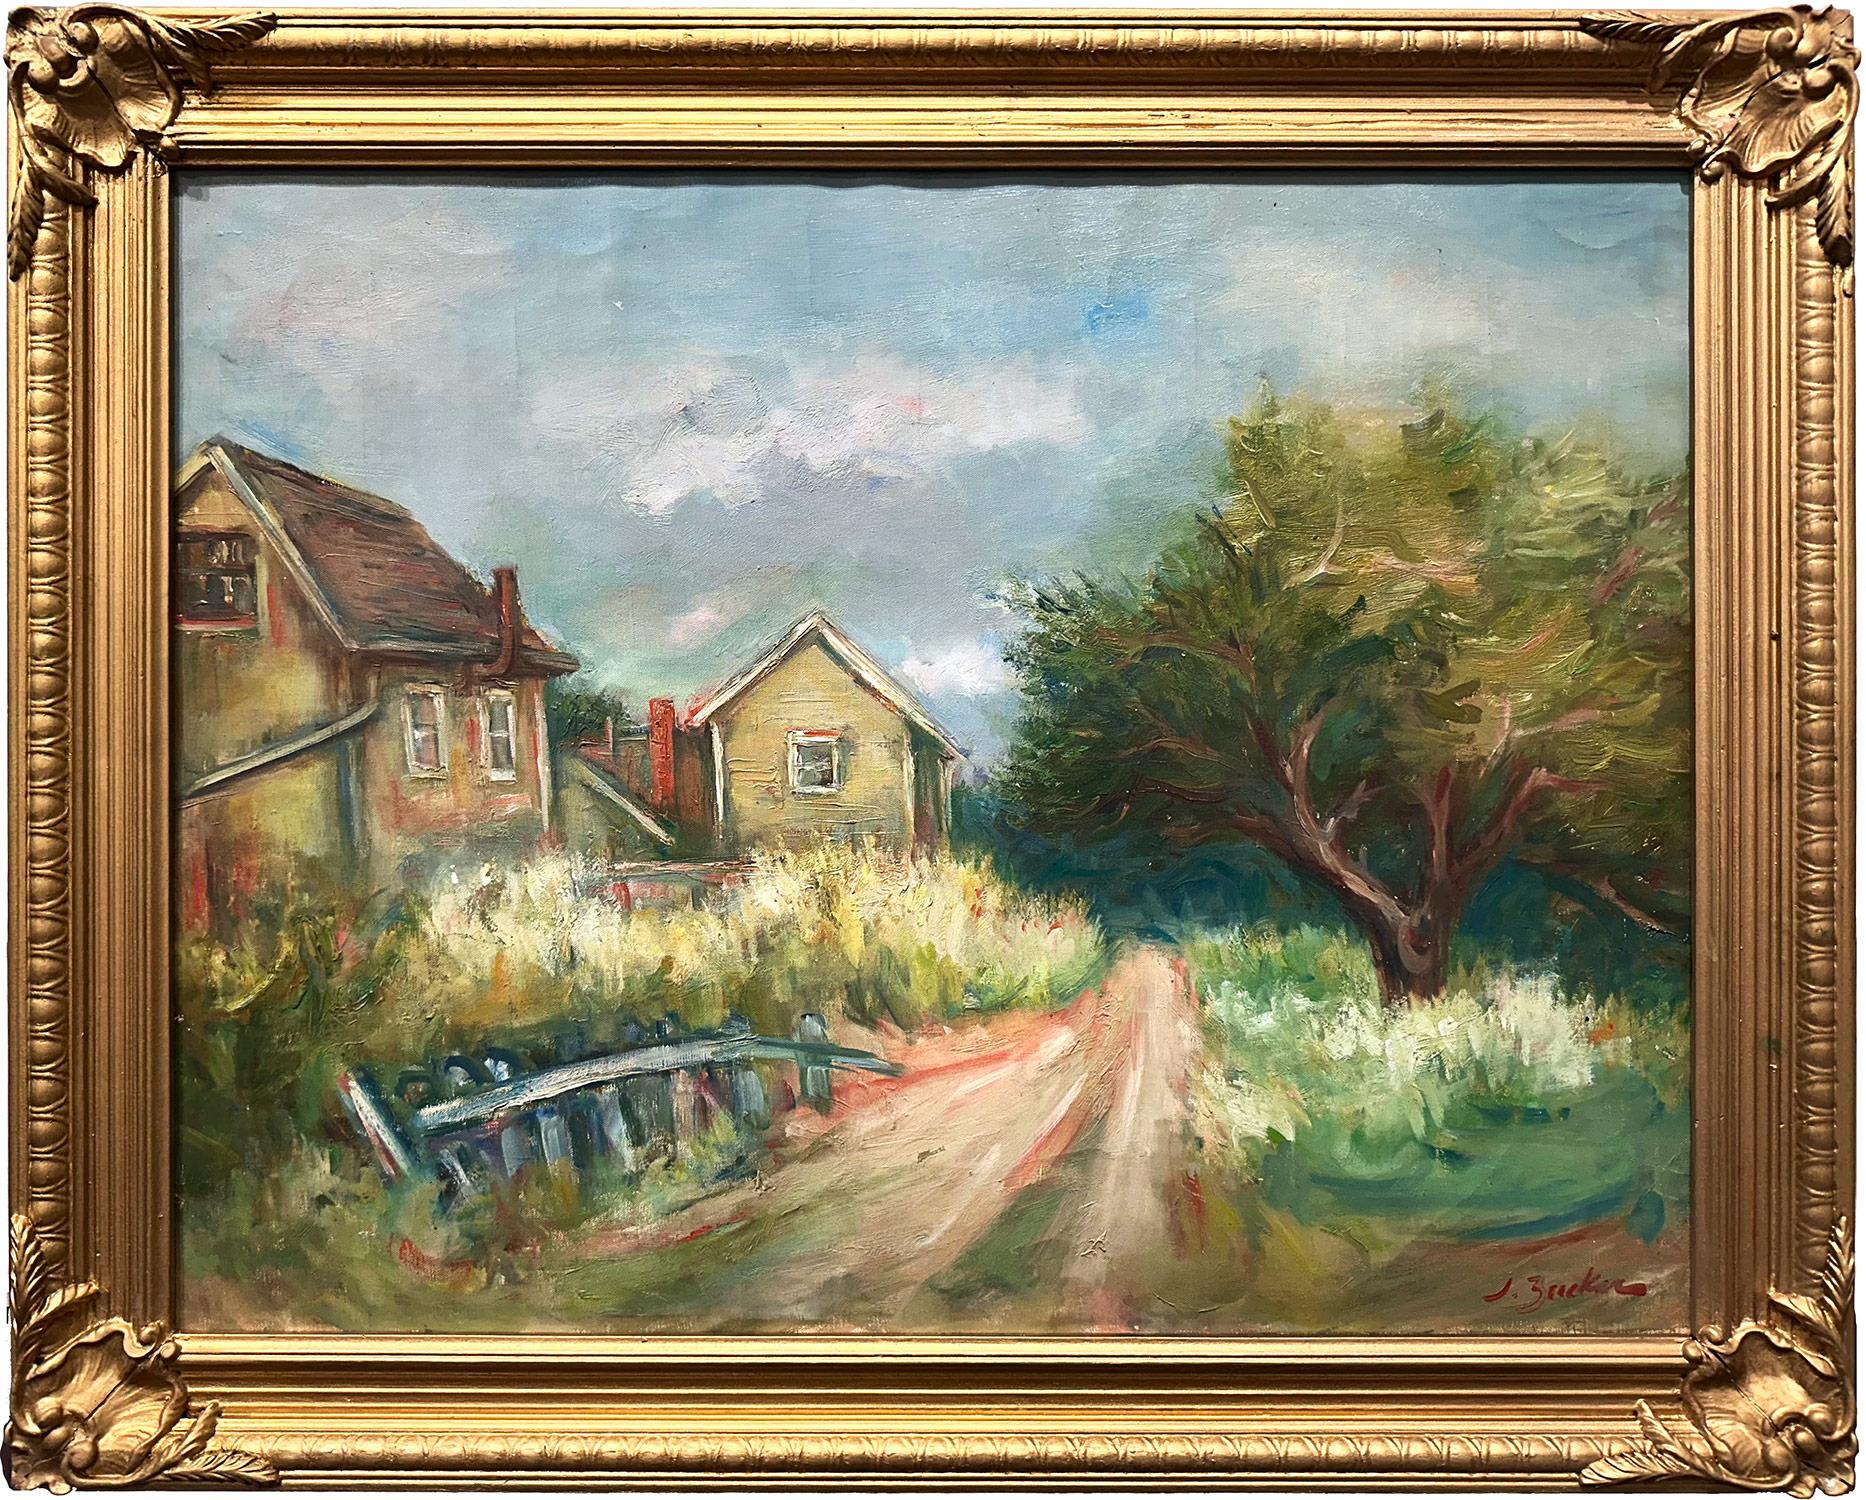 Jacques Zucker Landscape Painting - "Pathway to the Farm" Post-Impressionist Landscape Oil Painting on Canvas Frame